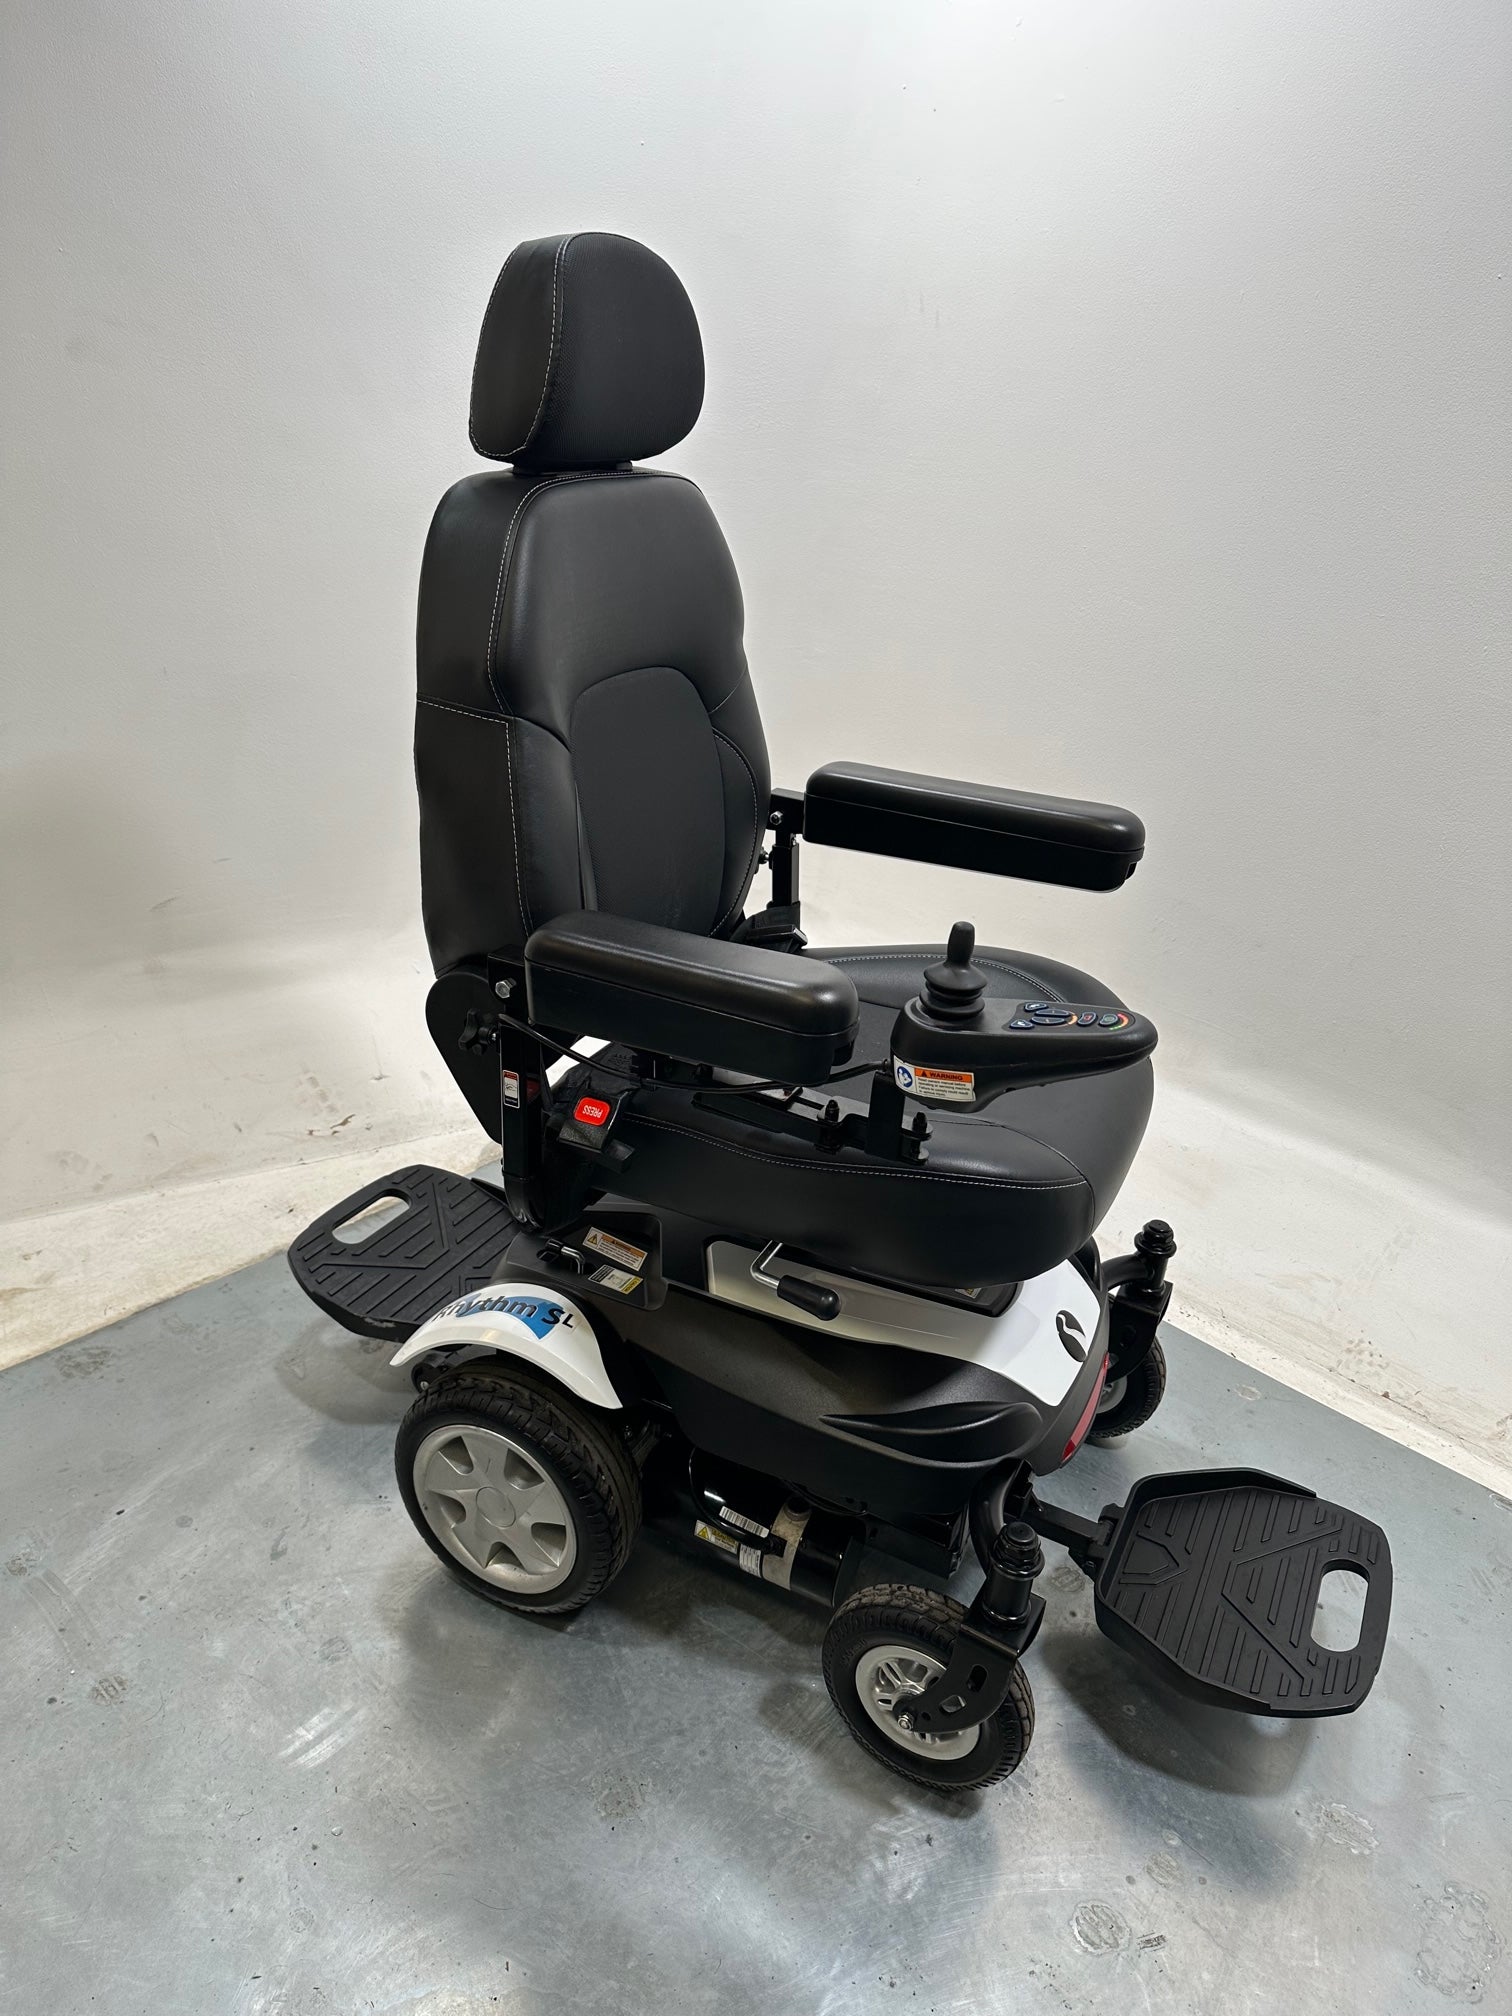 RASCAL RHYTHM SL POWERCHAIR WITH SEAT RAISER AND TURNABOUT EXCELLENT CONDITION